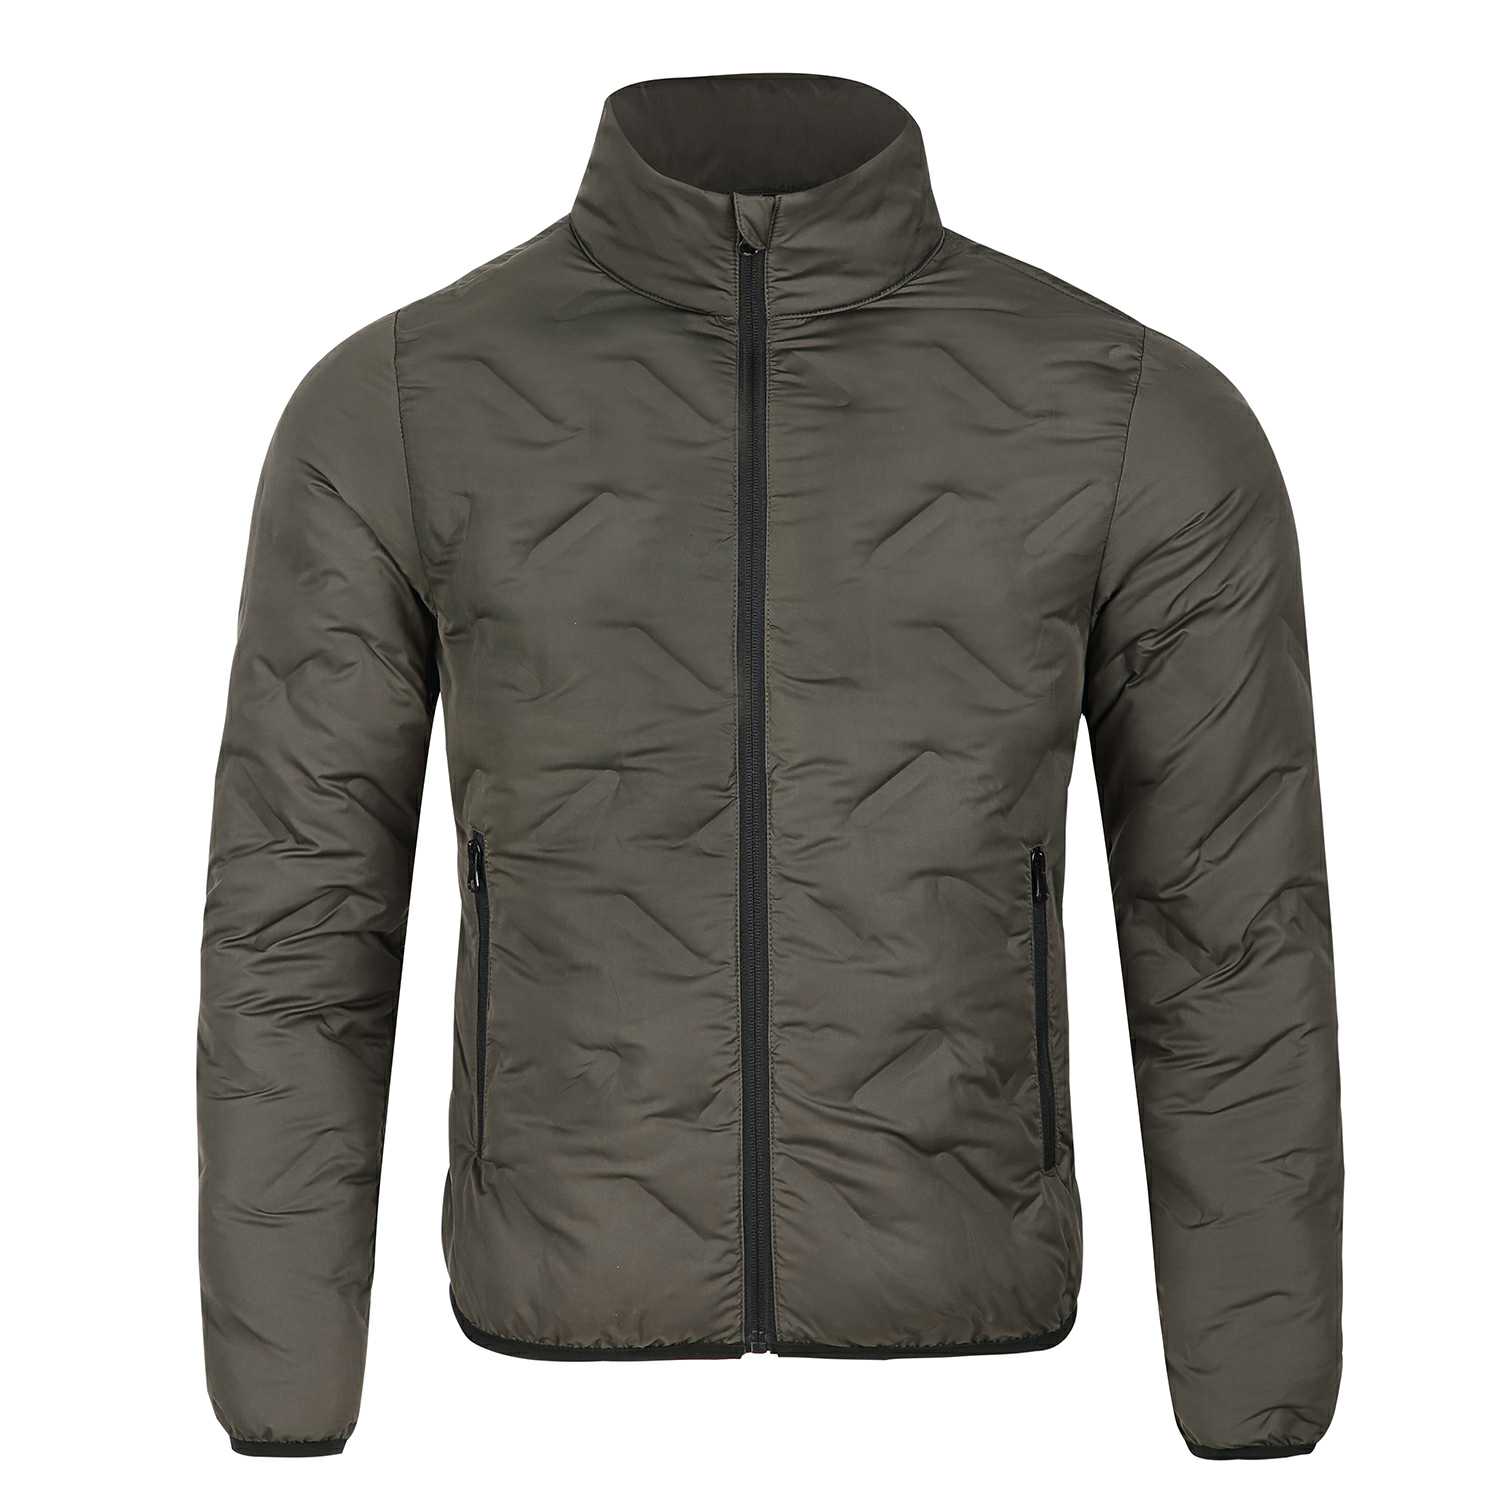 Waterproof padding jacket with hot fused for Men